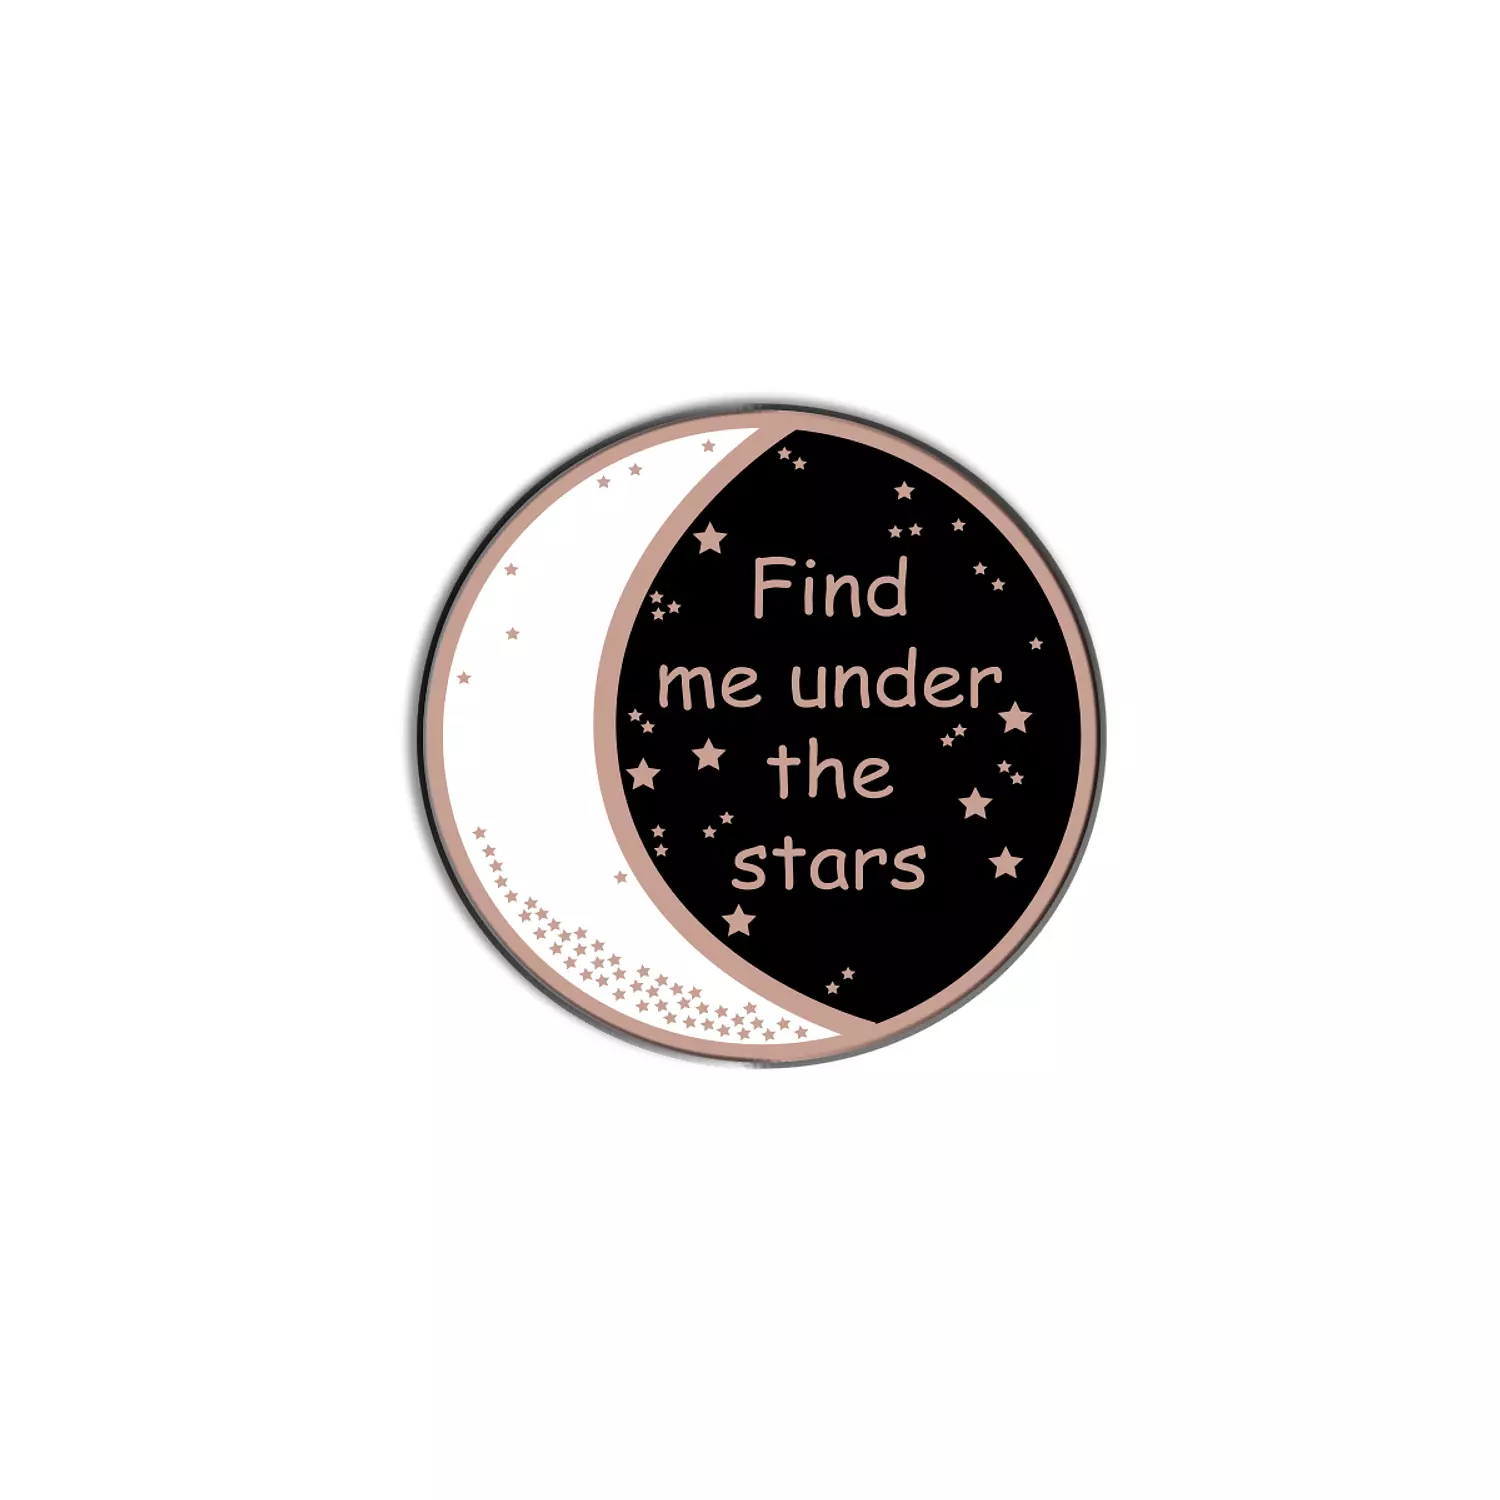 Find me under the stars - Moon 🌙 hover image